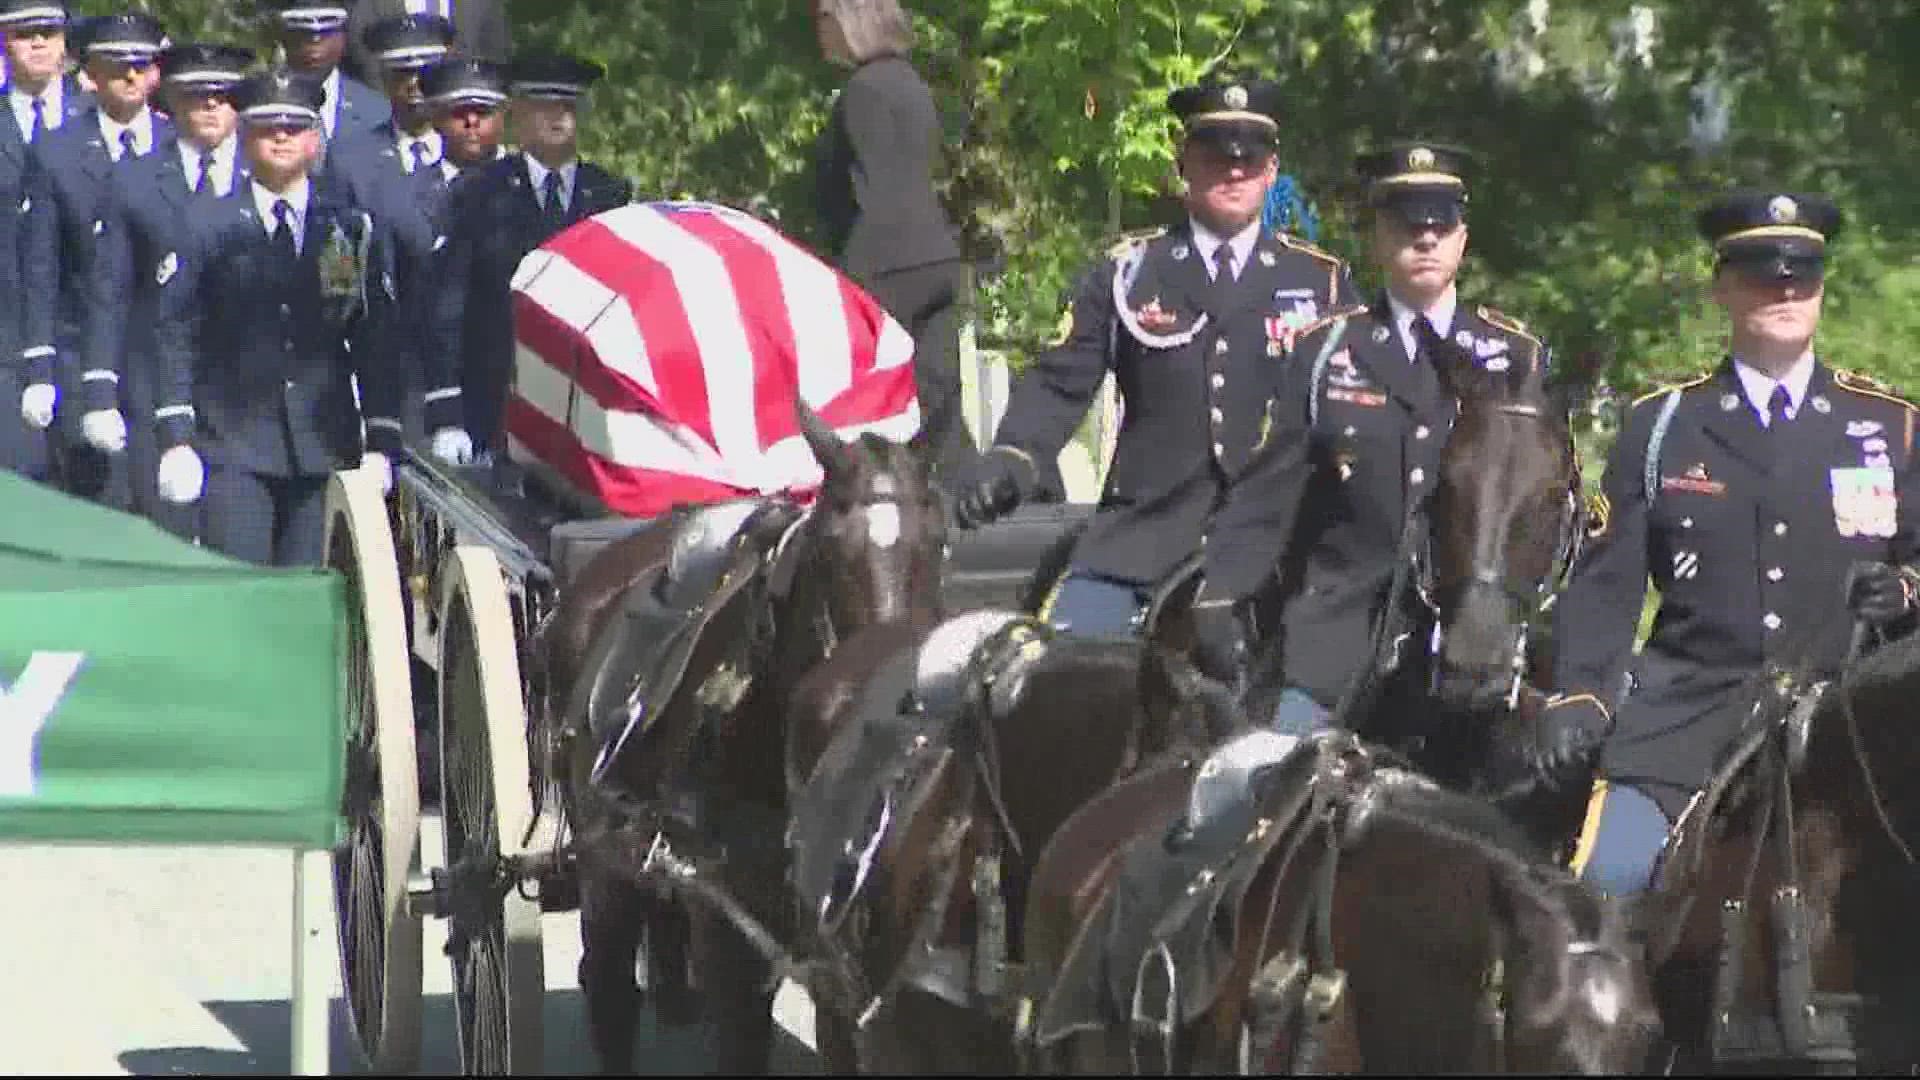 McGee was laid to rest with full military honors including a flyover.